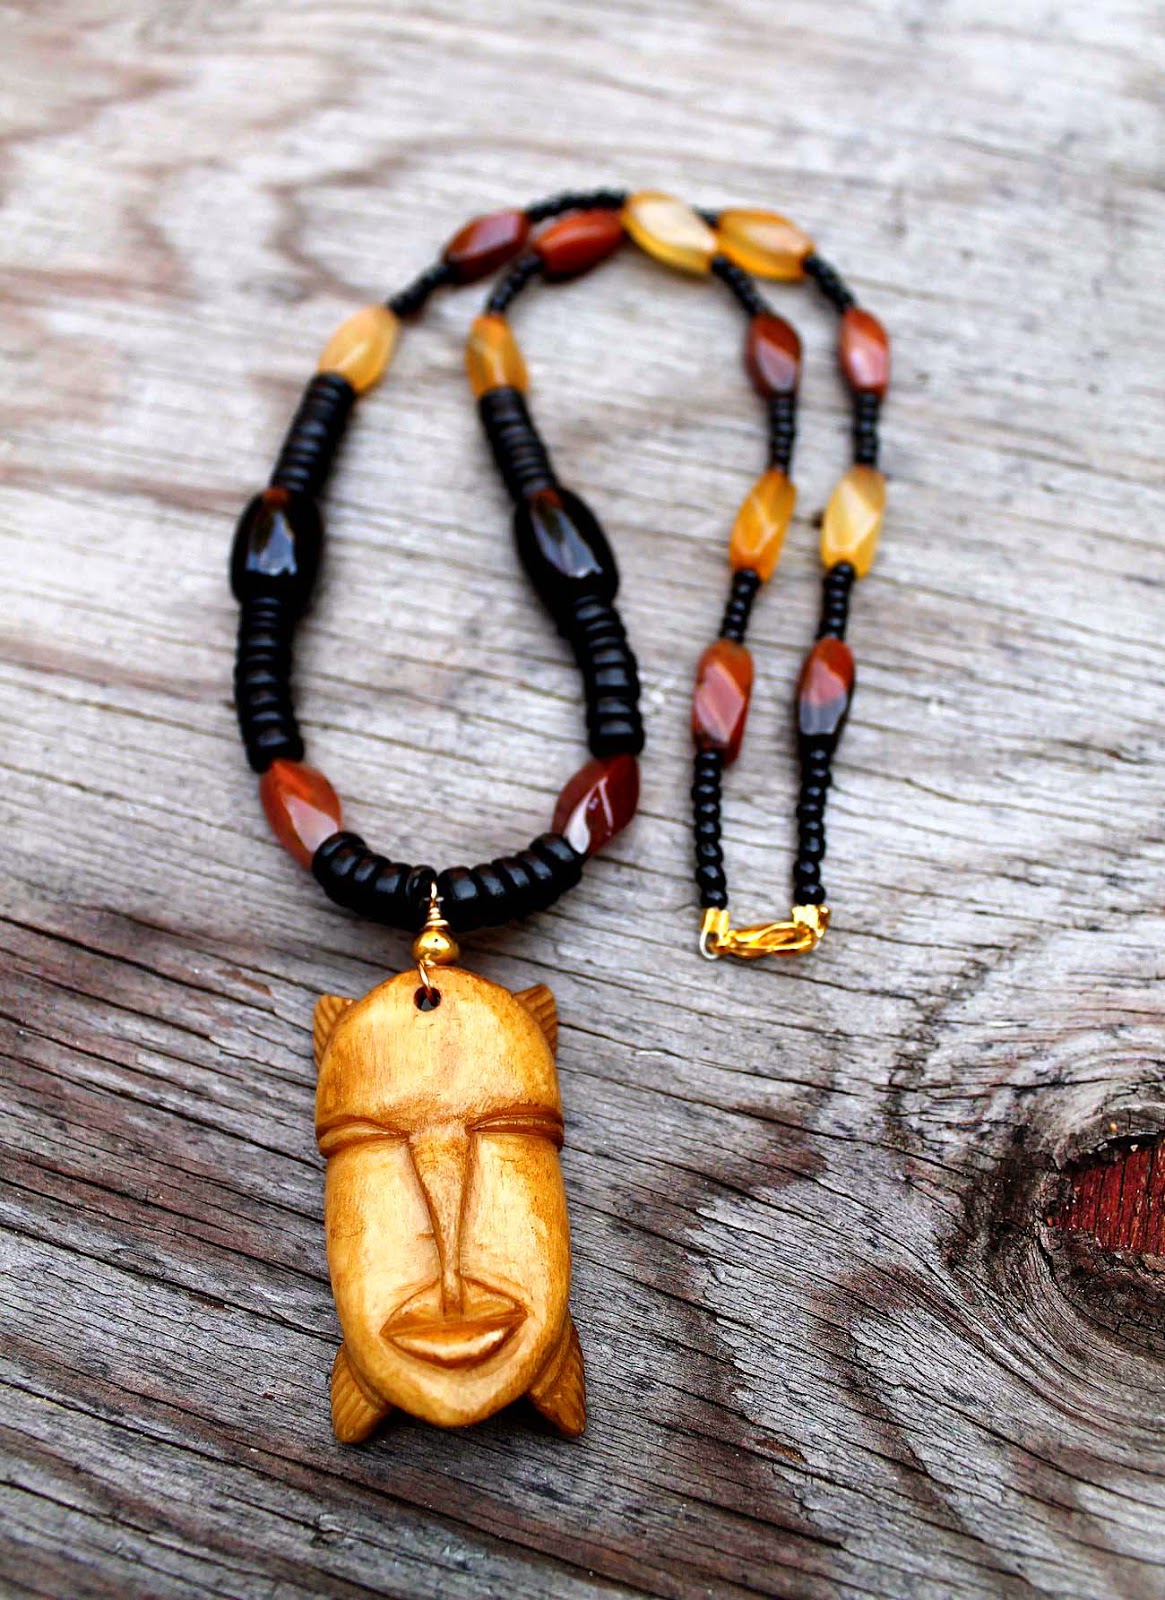 Men's African Jewely | Tribal African Jewelry for Men